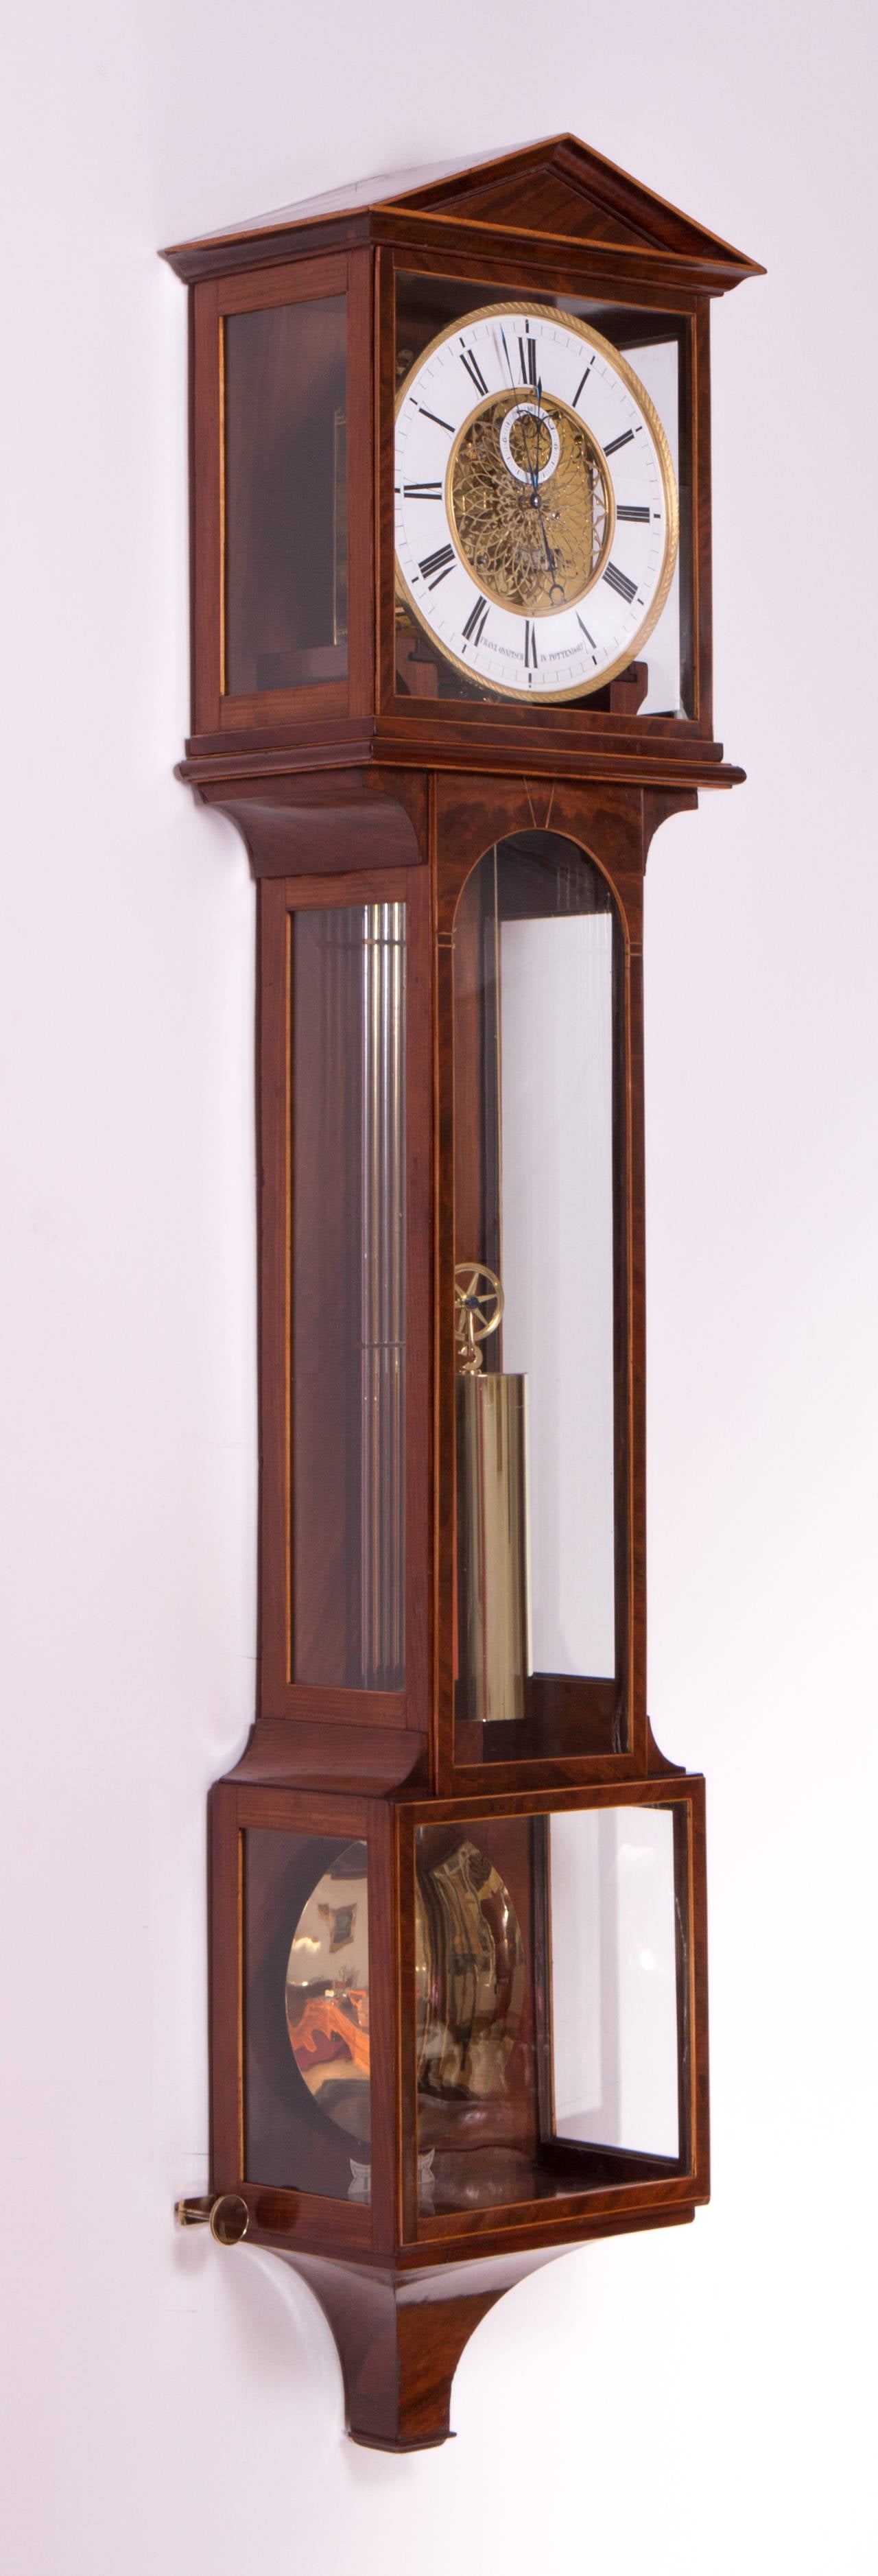 Signed:”Franz Onnitsch in Pottendorf,“ Austria, circa 1830.
Length: 153 cm, width: 30,7 – 19,5 cm – 27,8 cm, depth: 18 – 17 -18 cm, duration: one year.
Mahogany veneered case, enamel chapter ring, enamel seconds ring, the center of the dial is